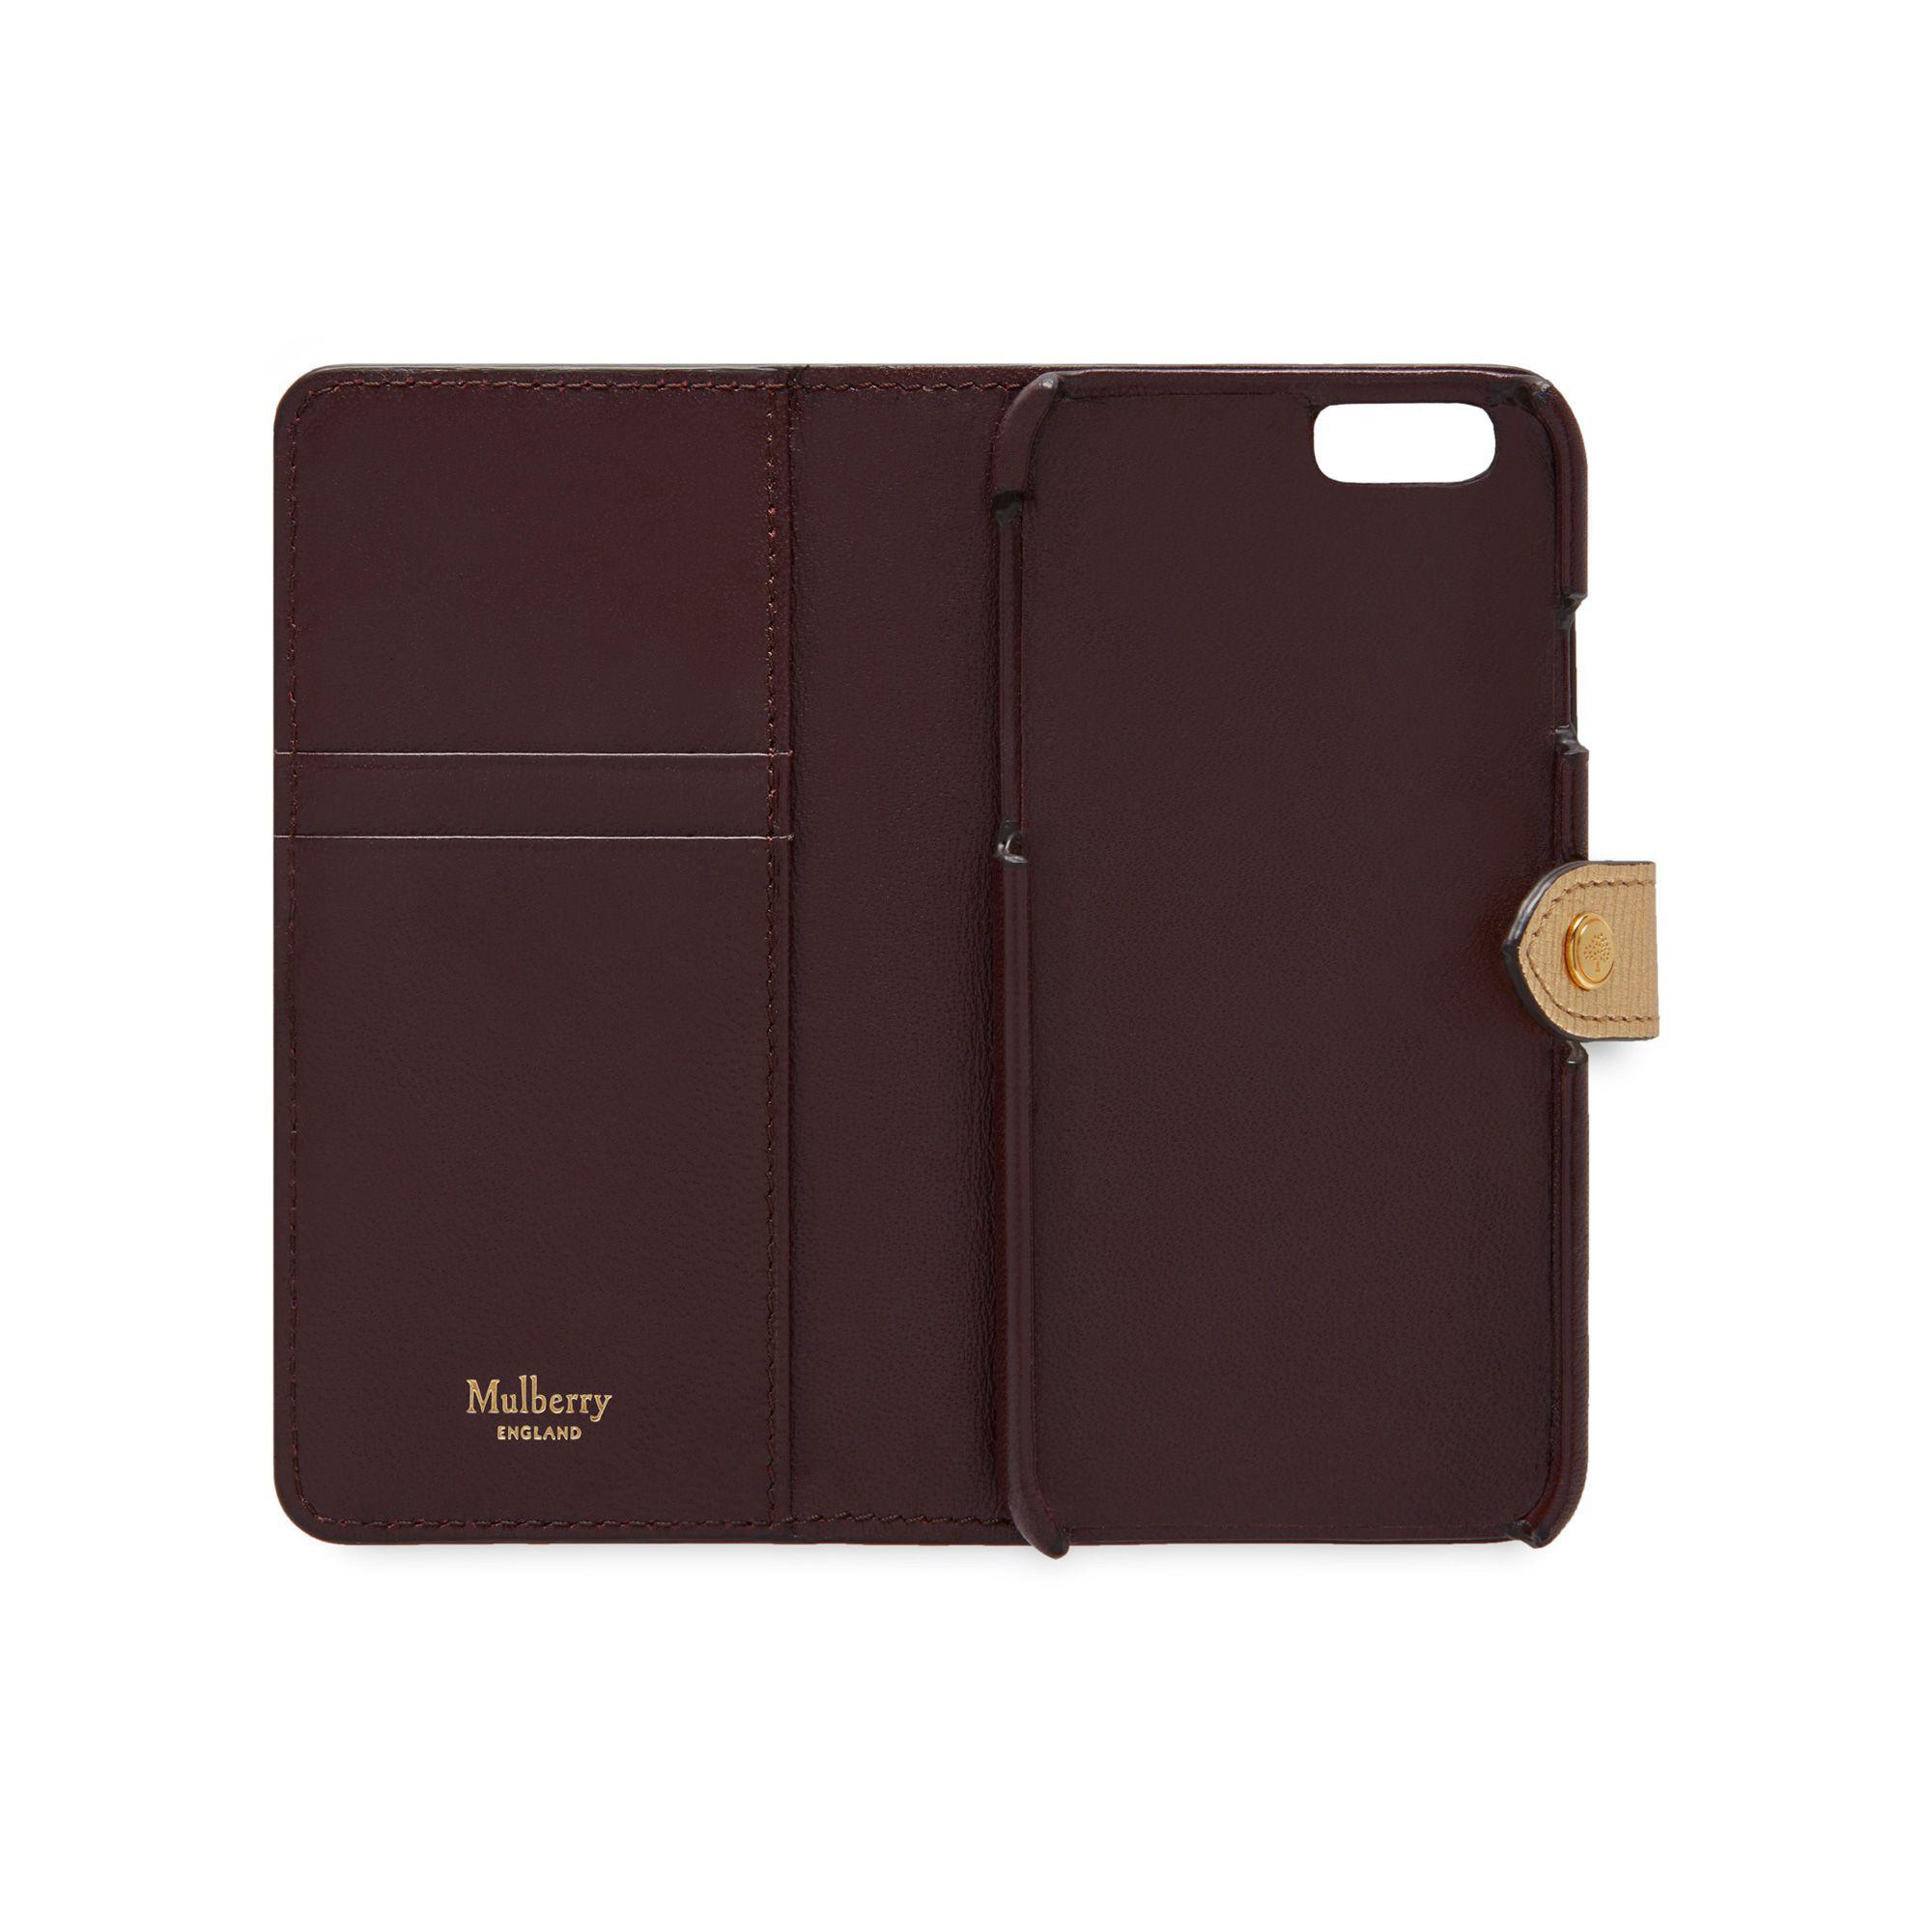 Mulberry Leather Iphone Flip Case in Gold (Metallic) - Lyst